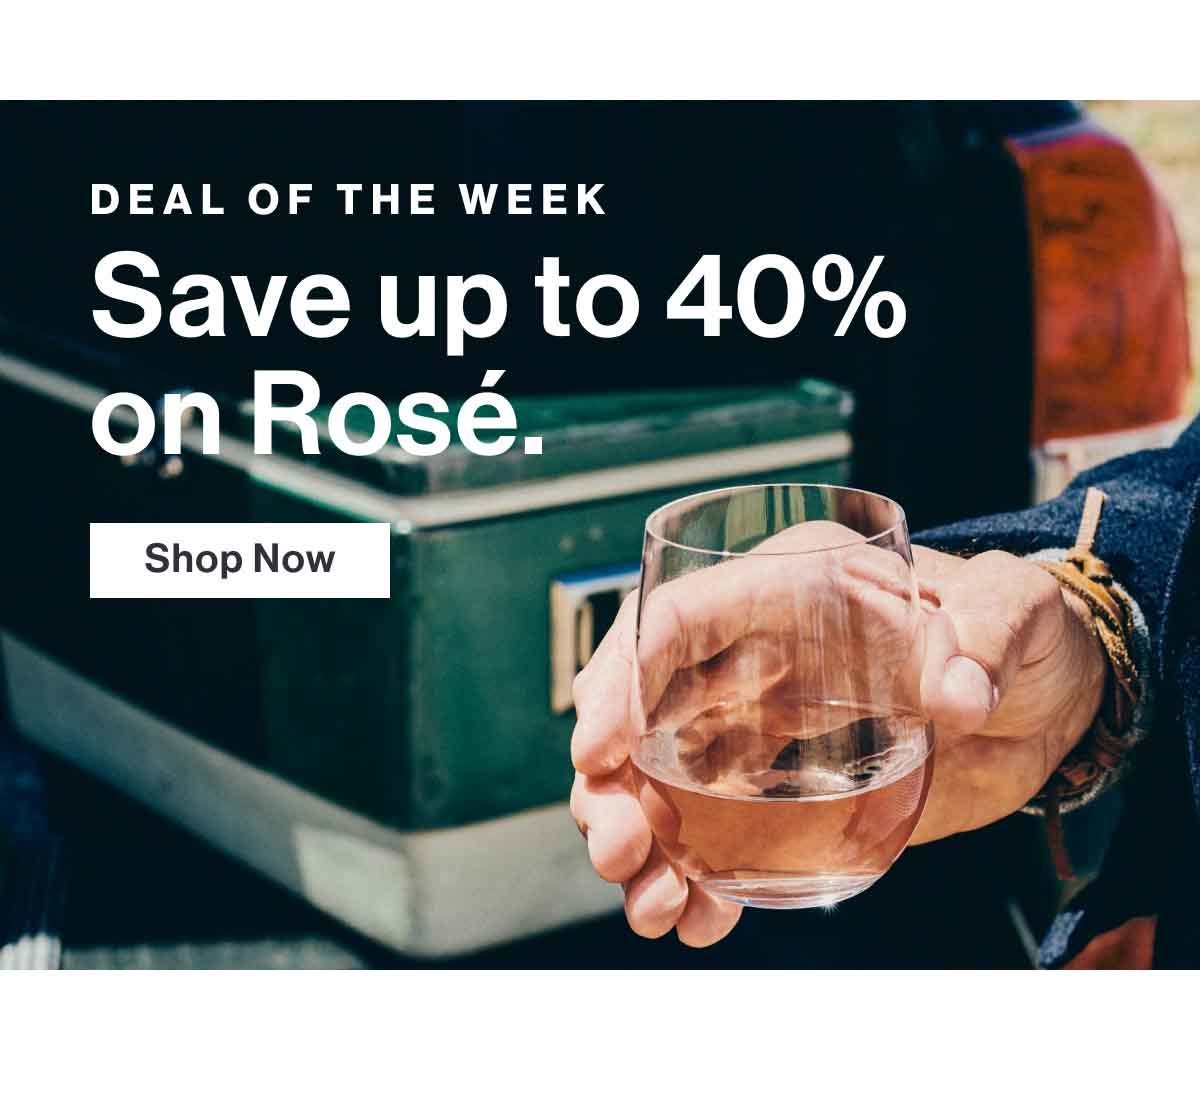 Save up to 40% on Rose - Shop Now